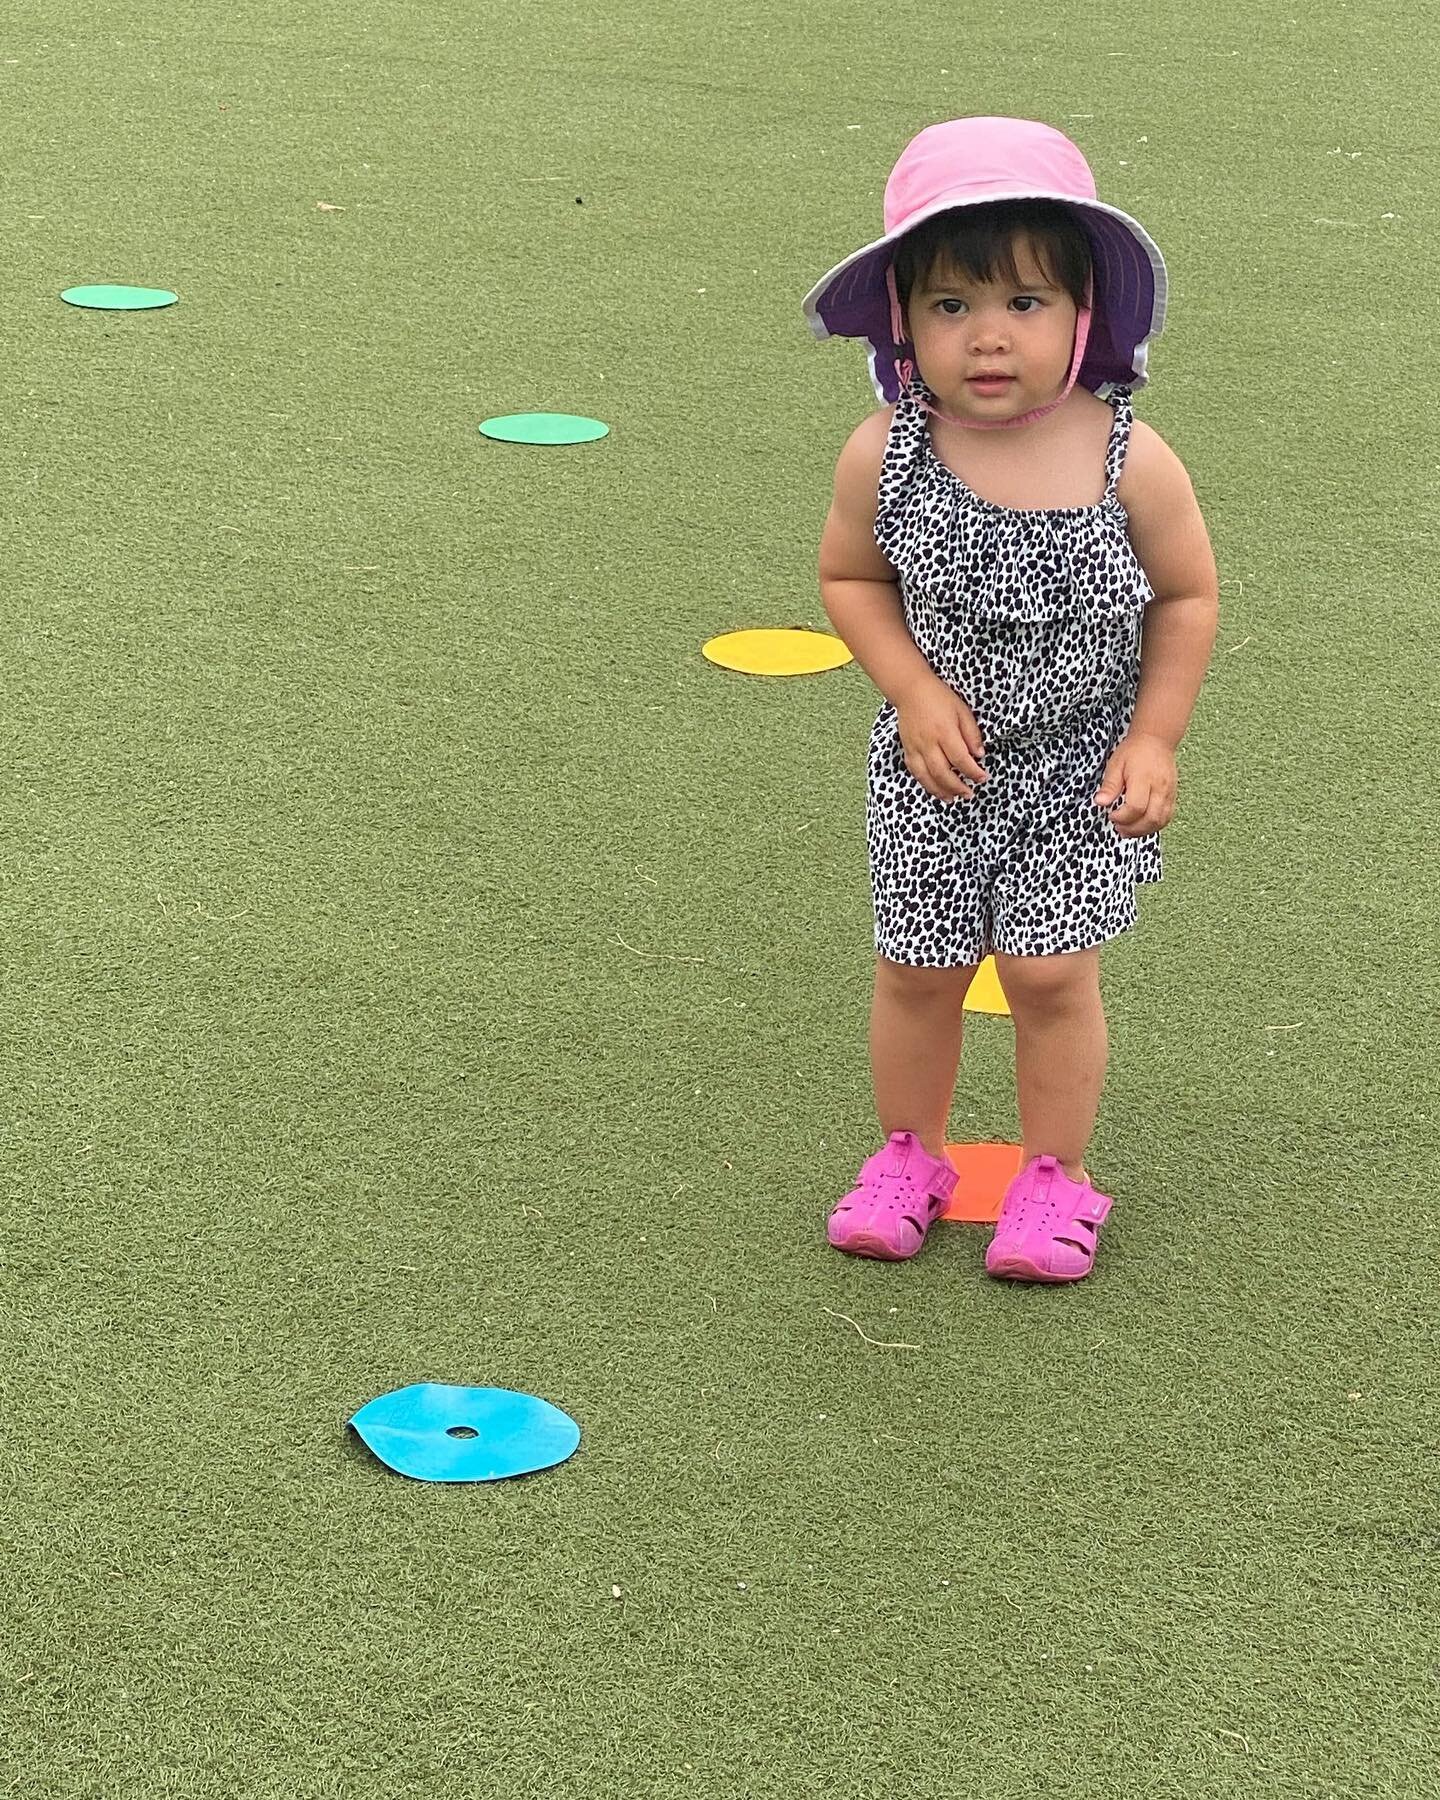 You&rsquo;re never to young to start loving fitness, movement and physical activity. 

⭐️We love our Zing! stars and are so happy to provide them safe, empowering spaces to learn to love living healthy lifestyles! 
.
.
.
#kidsfitness #kidsexercise #k